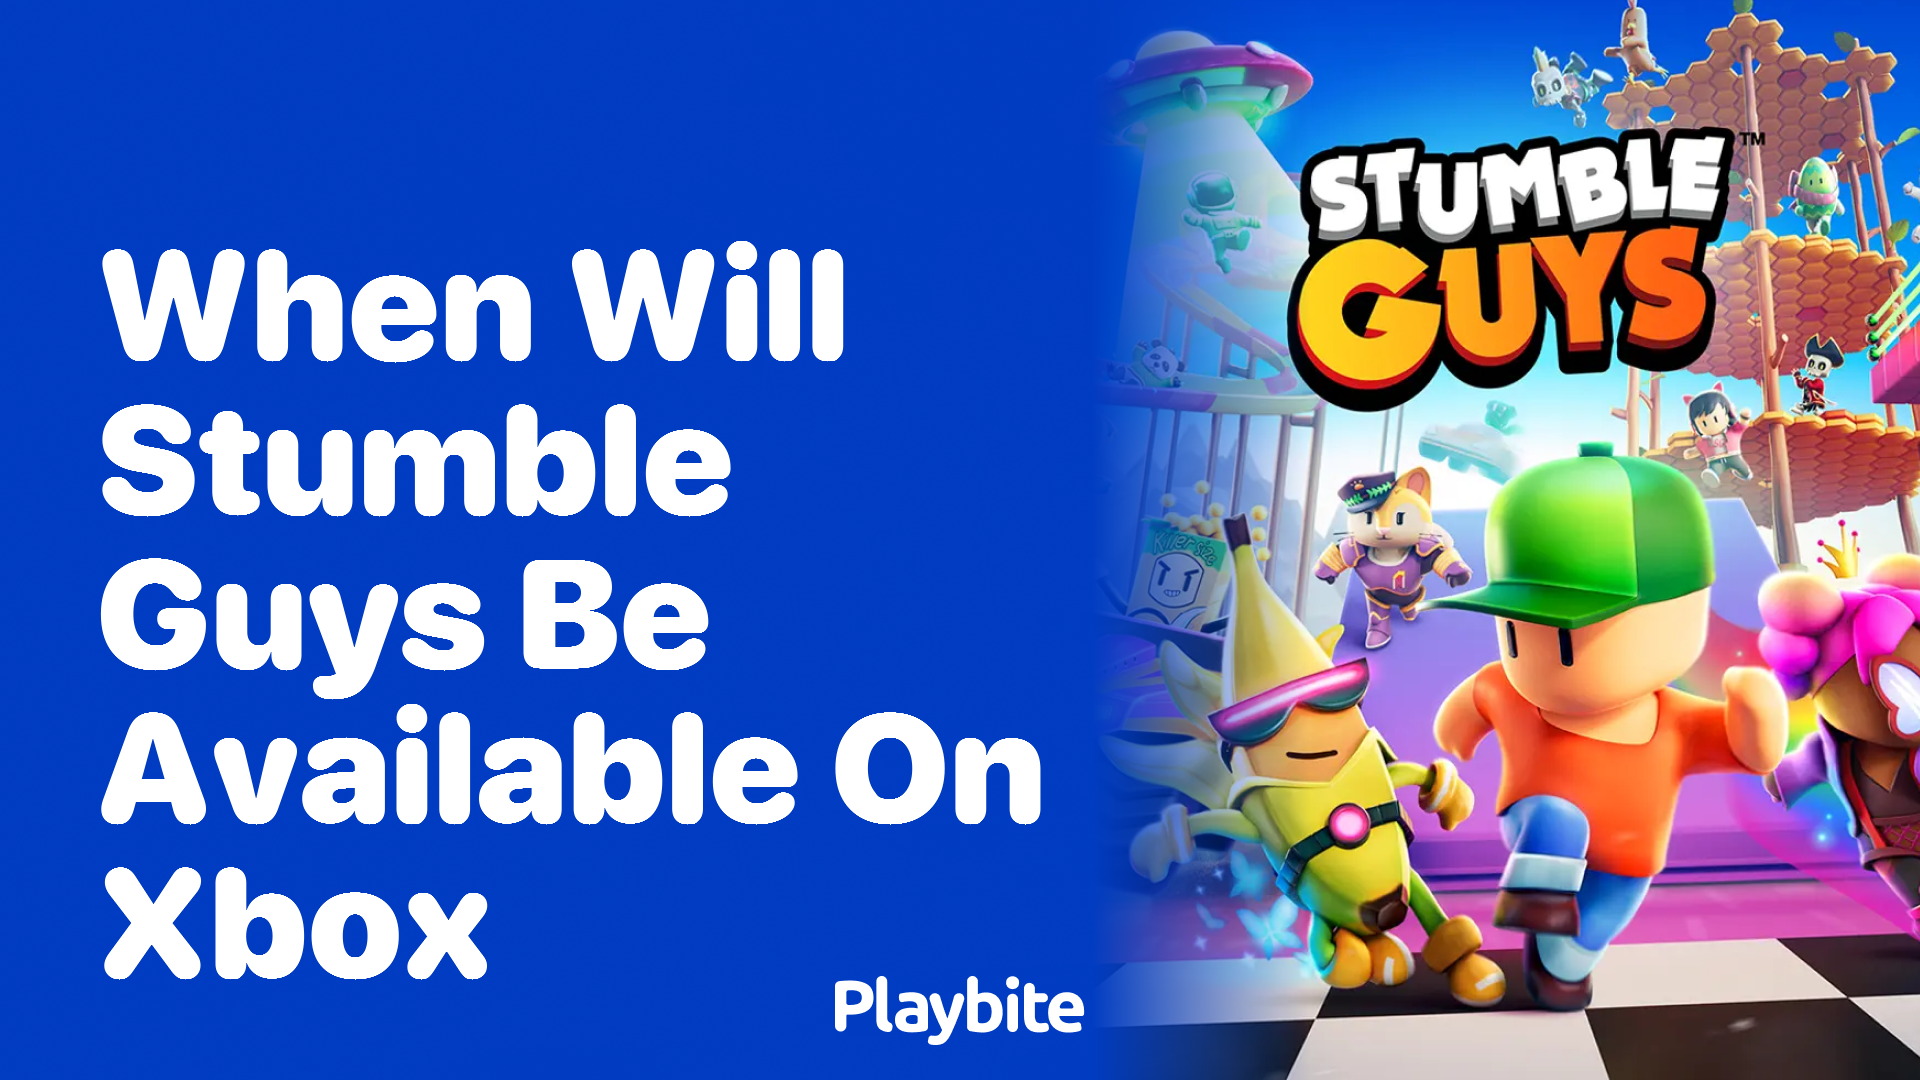 When Will Stumble Guys Be Available on Xbox?